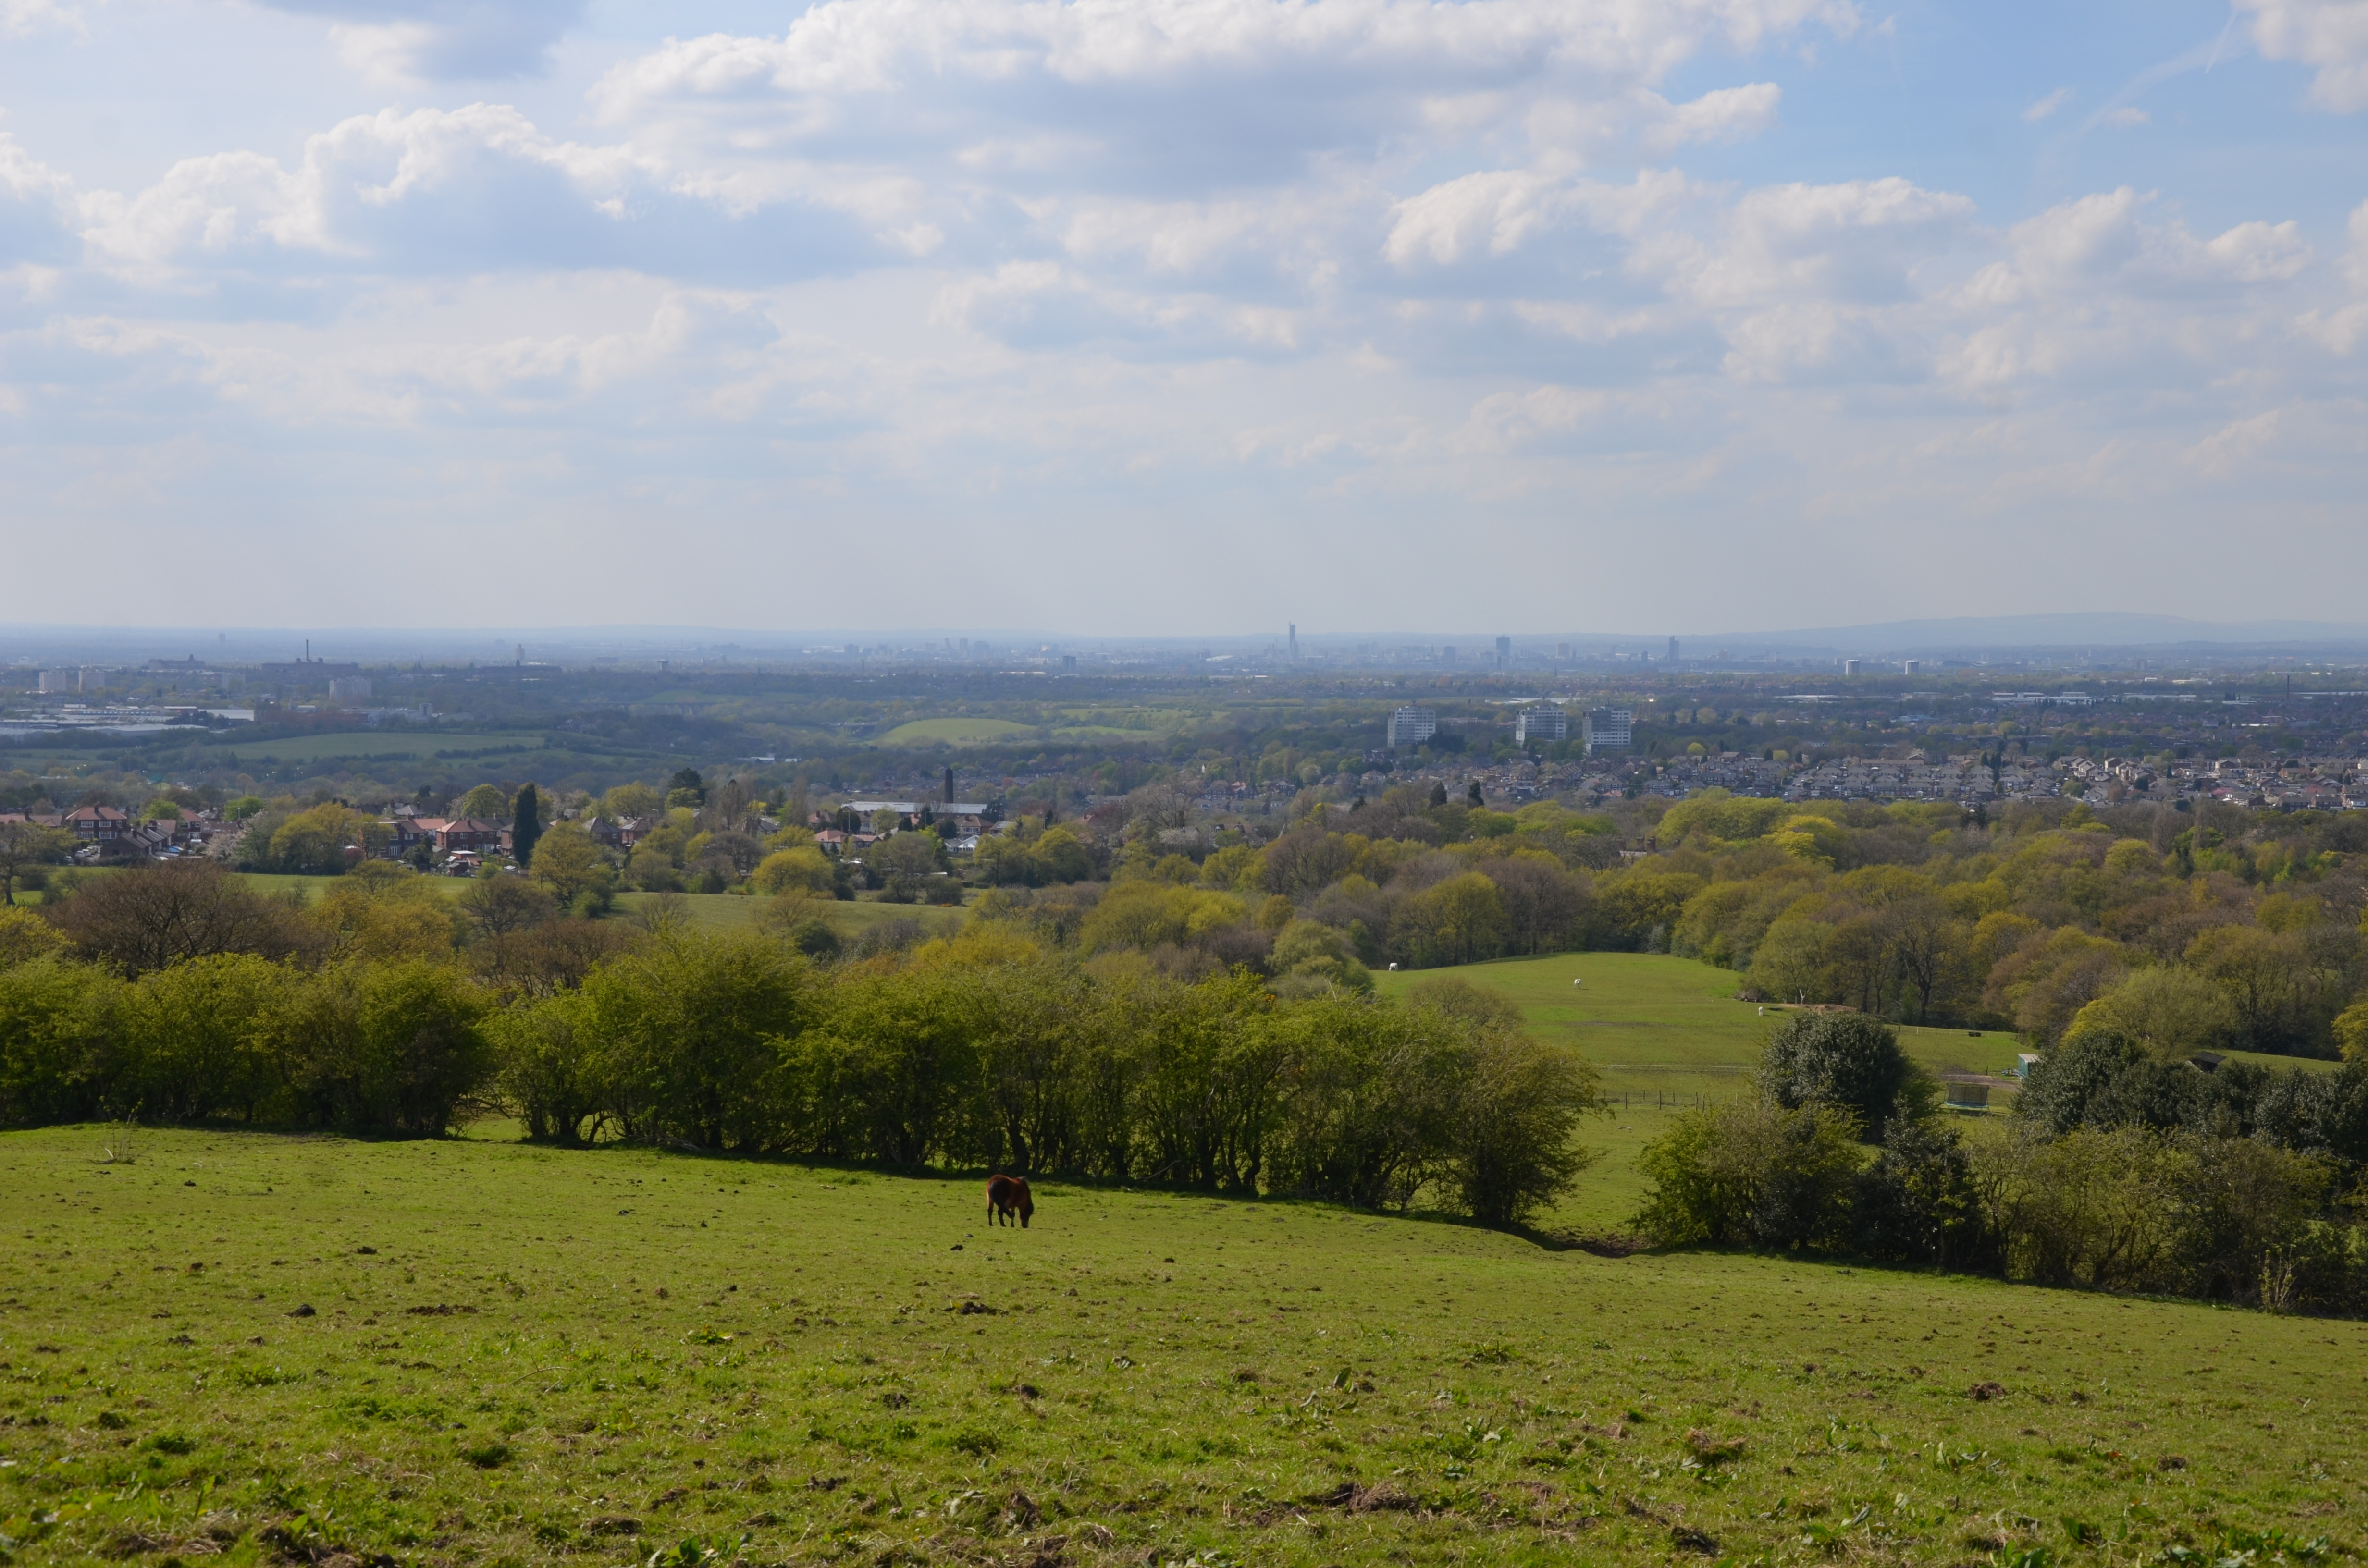 a horse standing in a field with trees and a city in the background